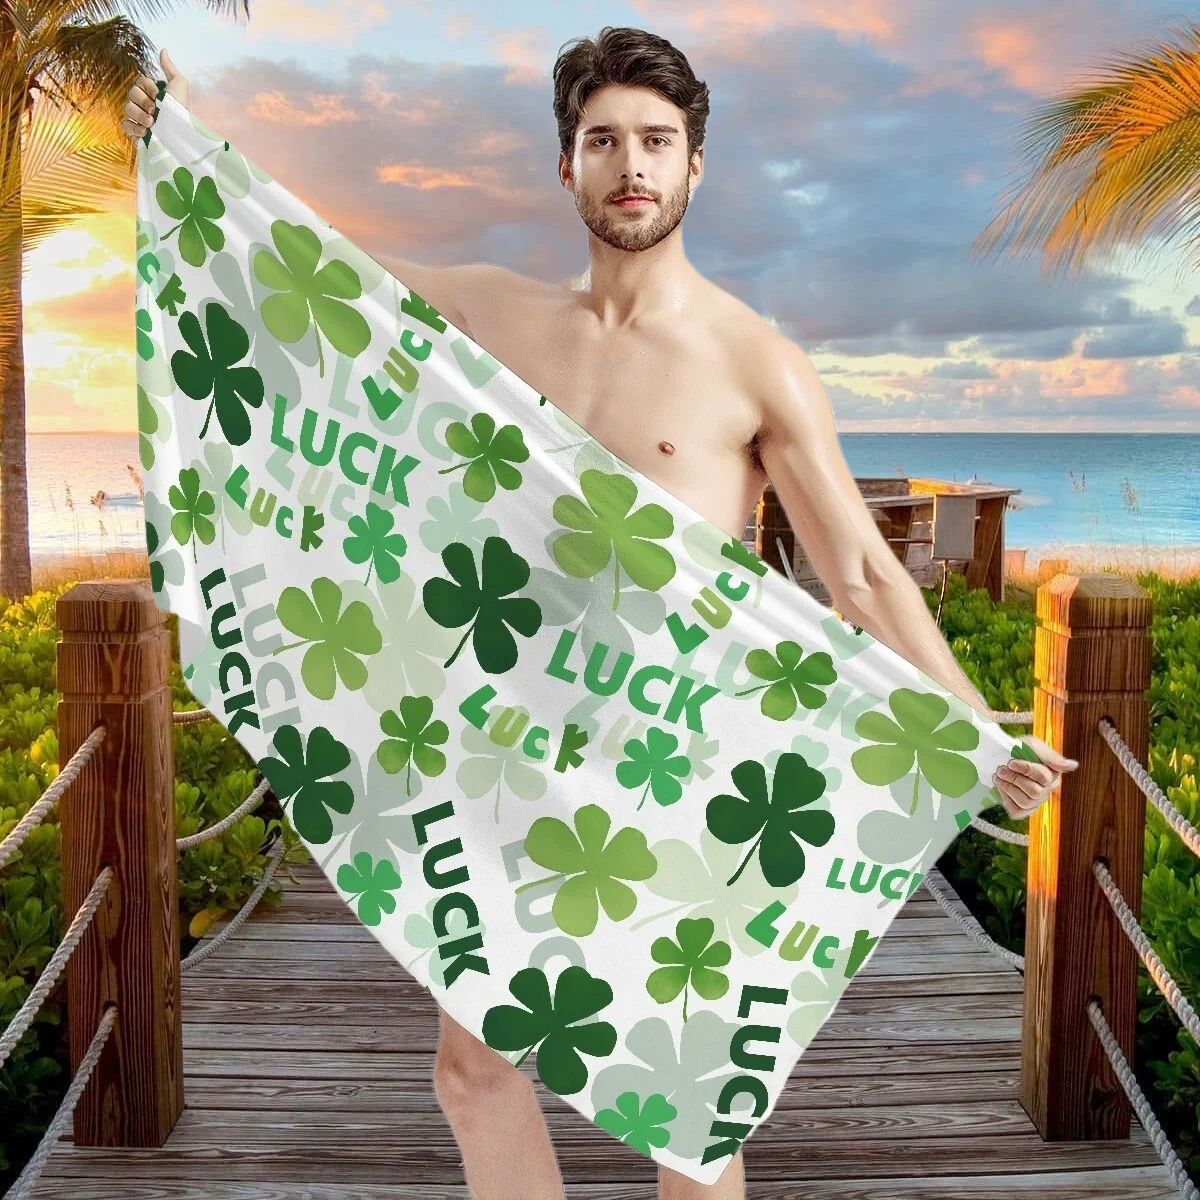 

Soft Blankets for Irish Lucky Day Green Grass Printing Beach Towel Practical Gifts St. Patrick's Day Absorbent Face Towels Decor